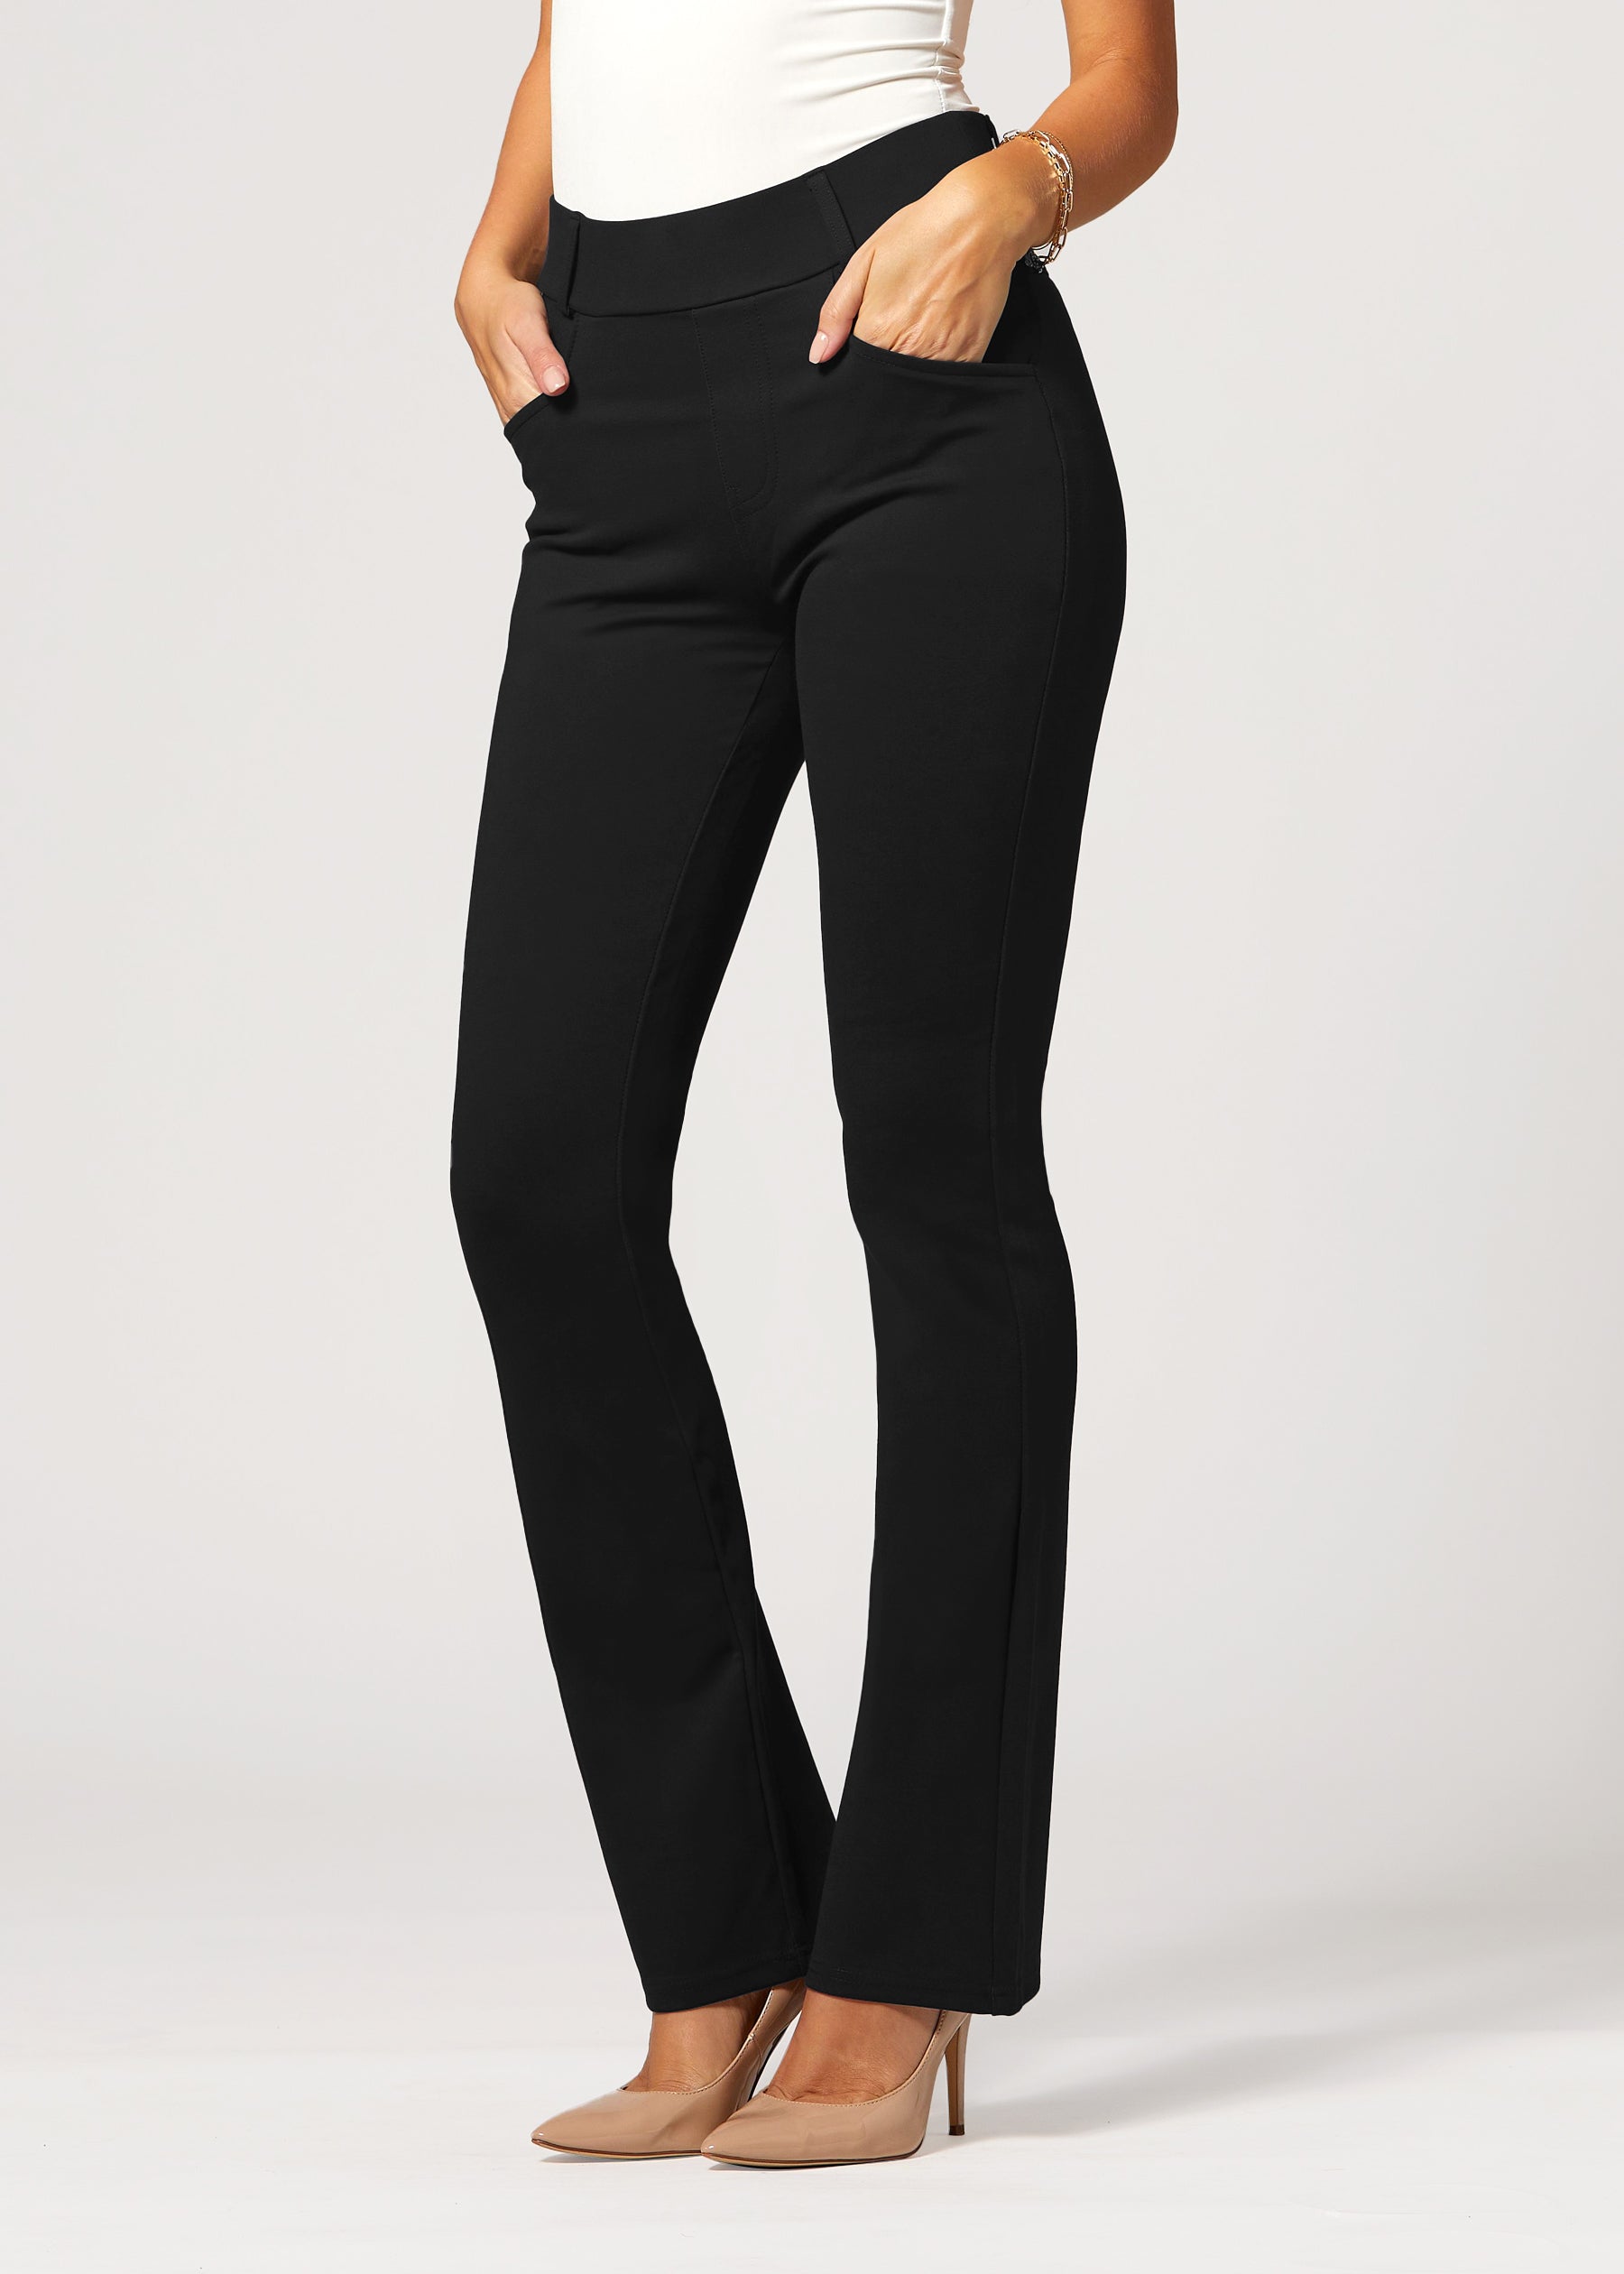 Uplift Ponte Knit Bootcut Dress Pants with Pockets